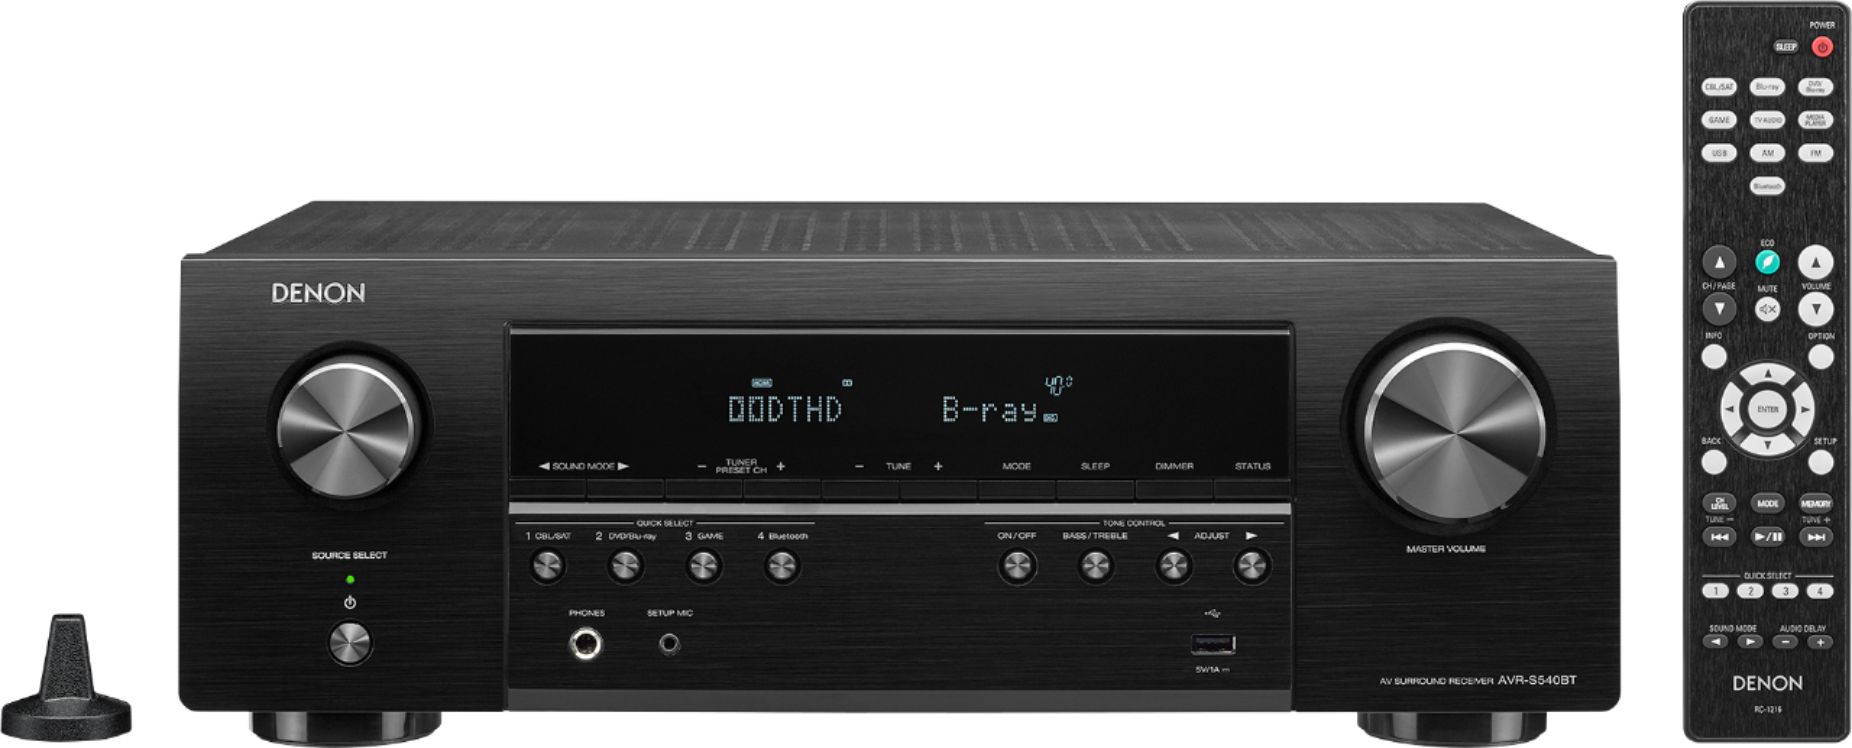 Denon AVR-S540BT Receiver, 5.2 channel, 4K Ultra HD and Video, Home Theater System, built-in Bluetooth and USB AVR-S540BT - Best Buy